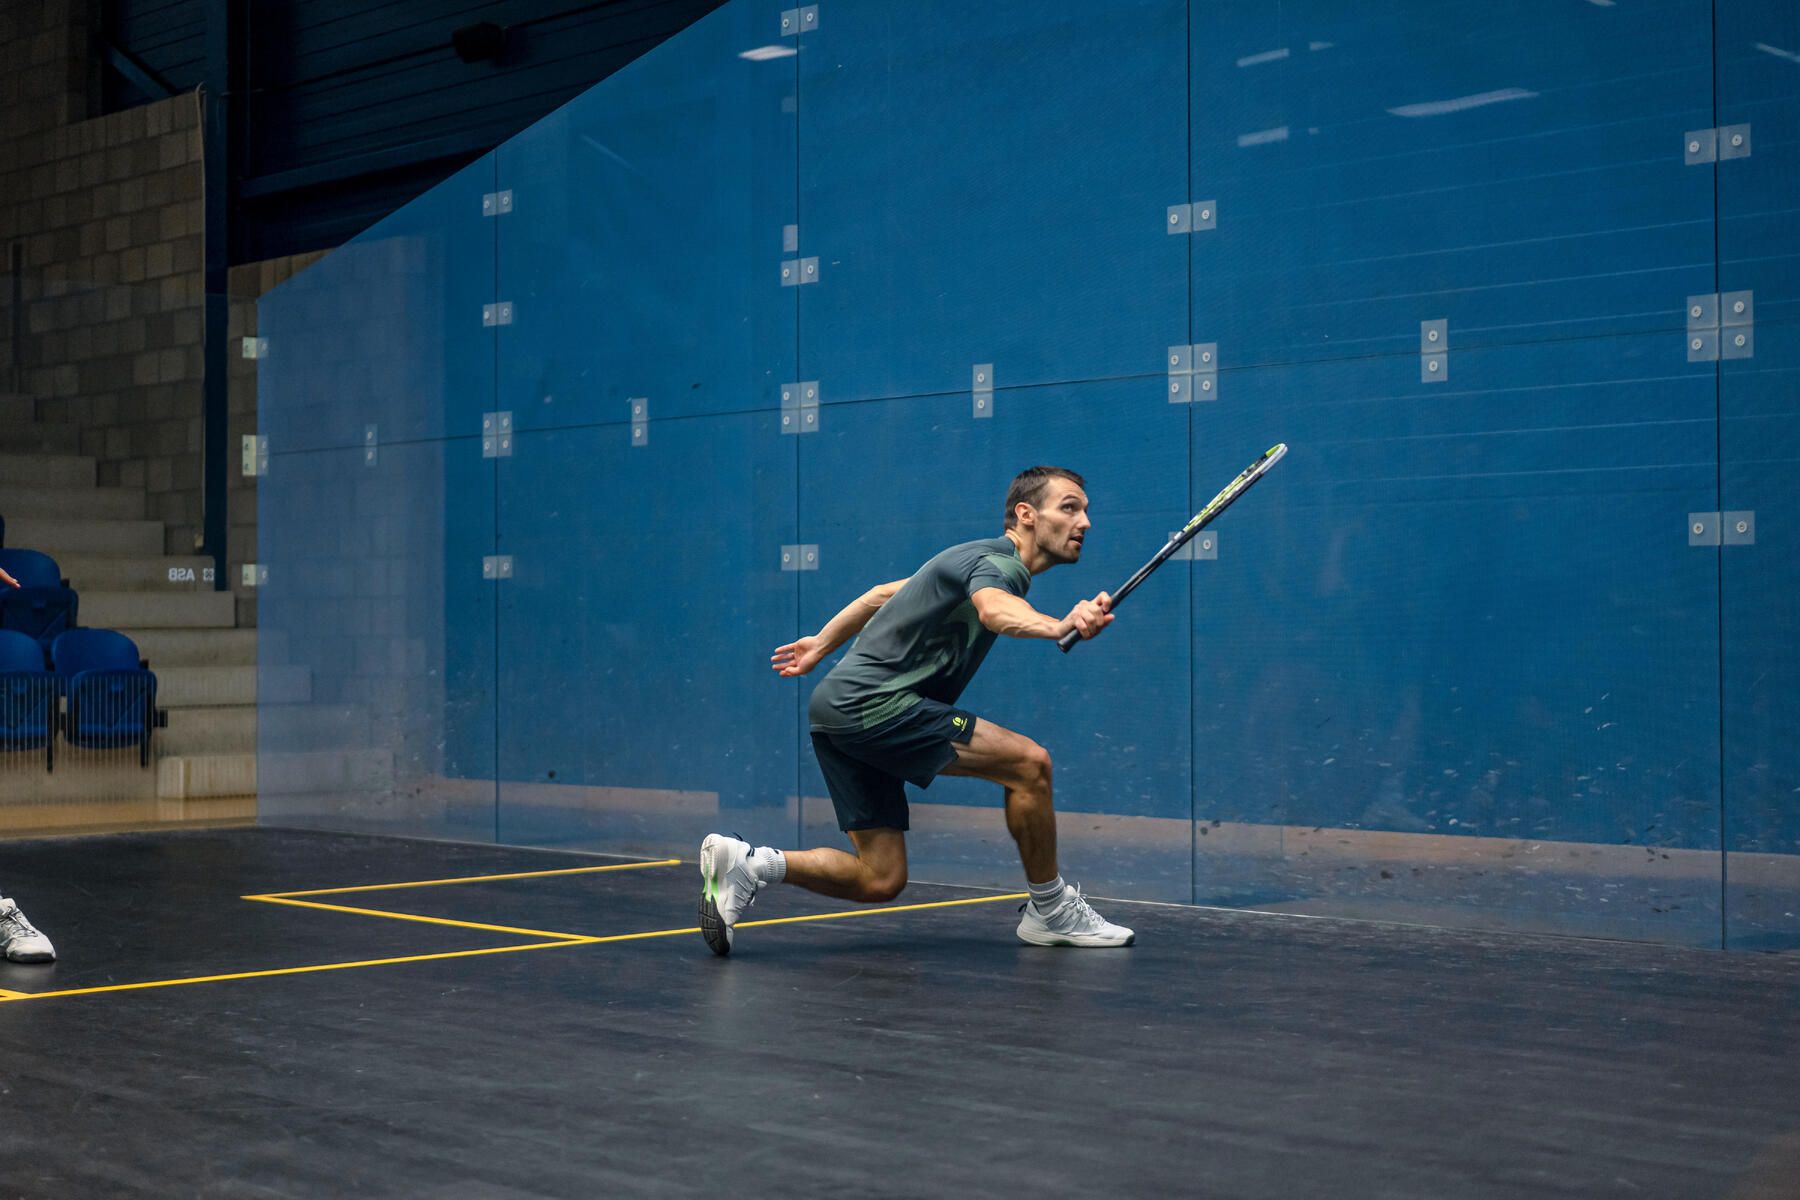 A shot of a person playing squash